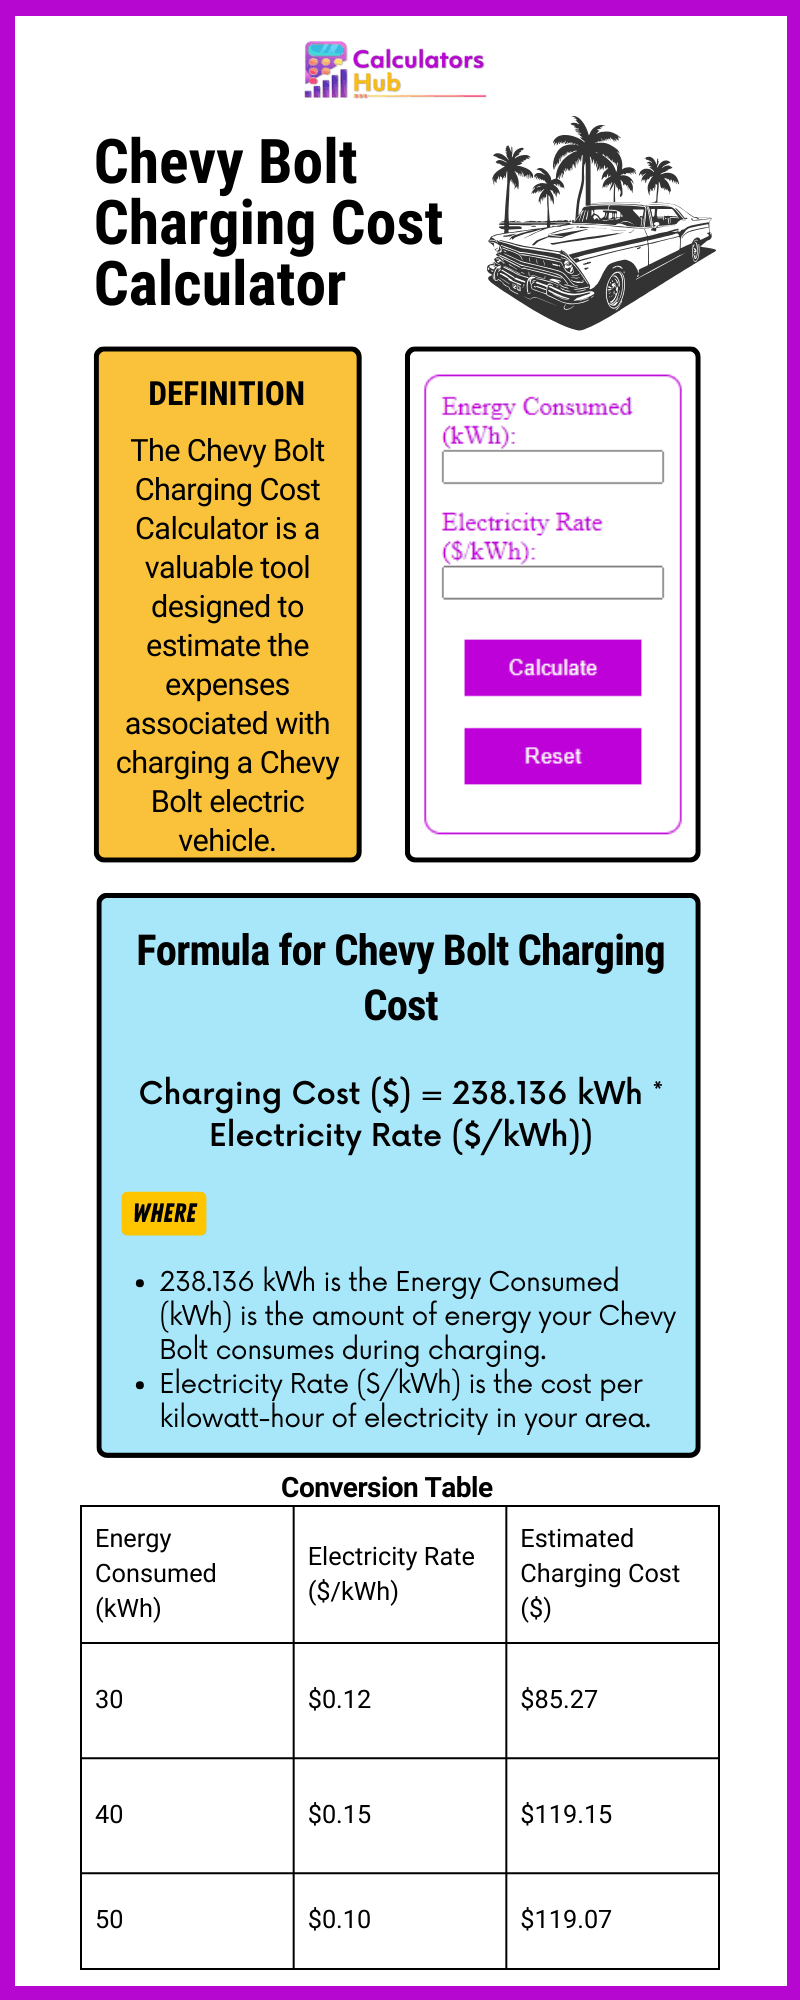 Chevy Bolt Charging Cost Calculator